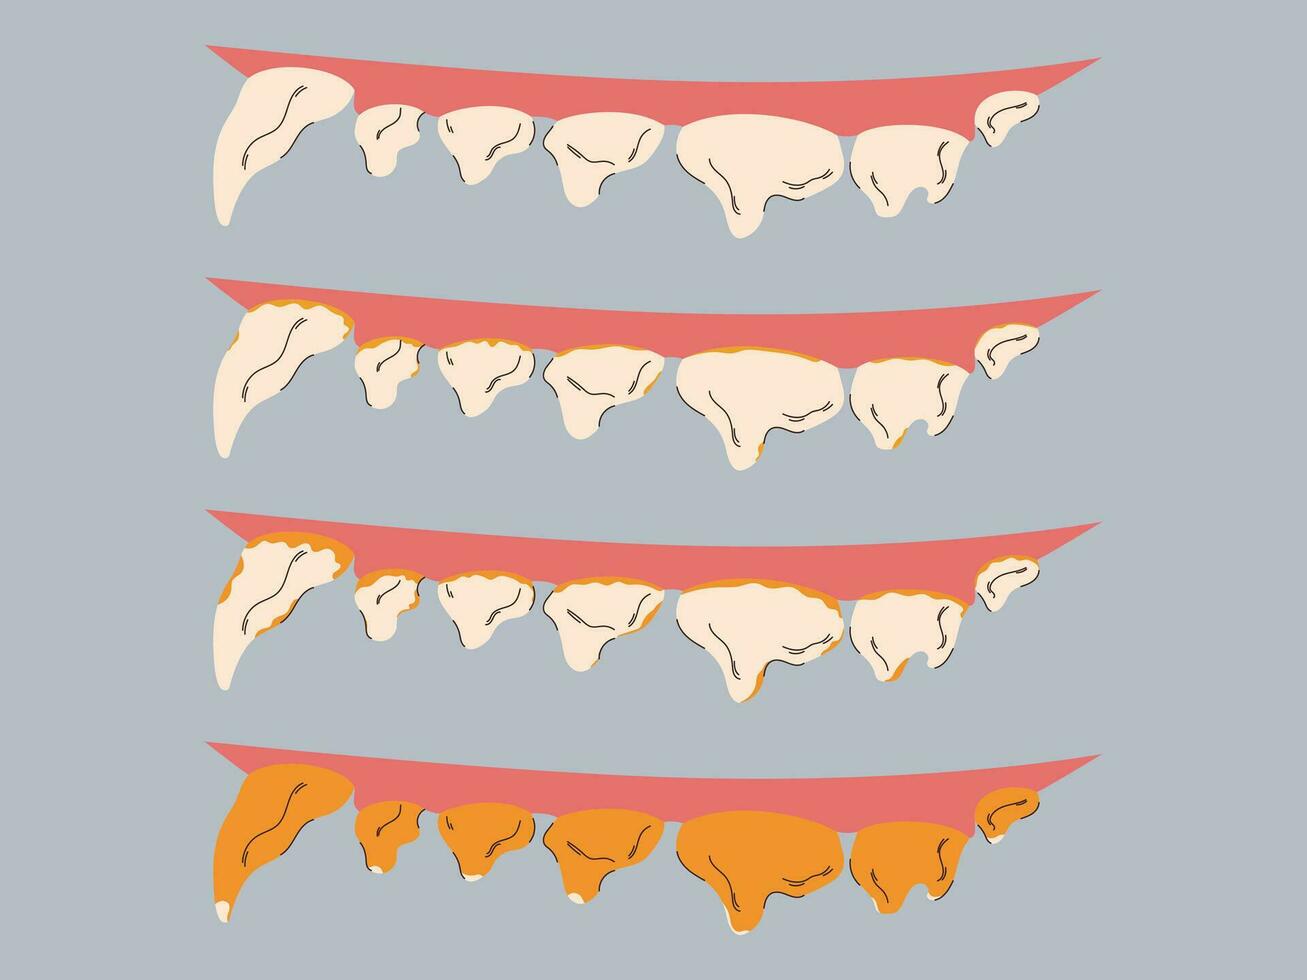 Stages of plaque and tartar formation in dogs. Gum disease prevention. Dog dental care concept. Vector illustration